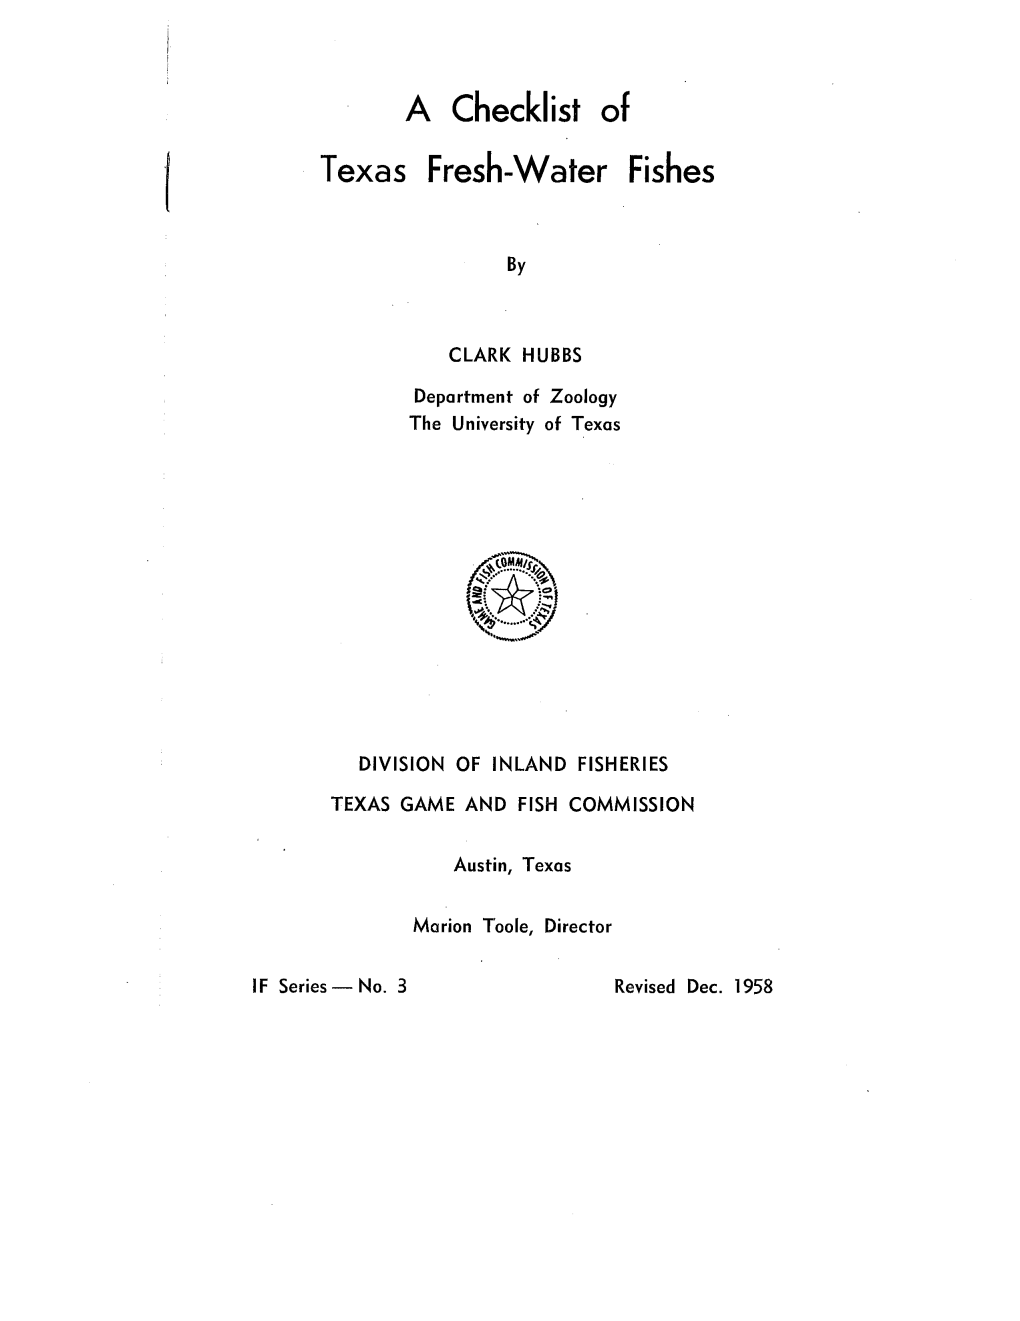 A Checklist of Texas Fresh-Water Fishes By